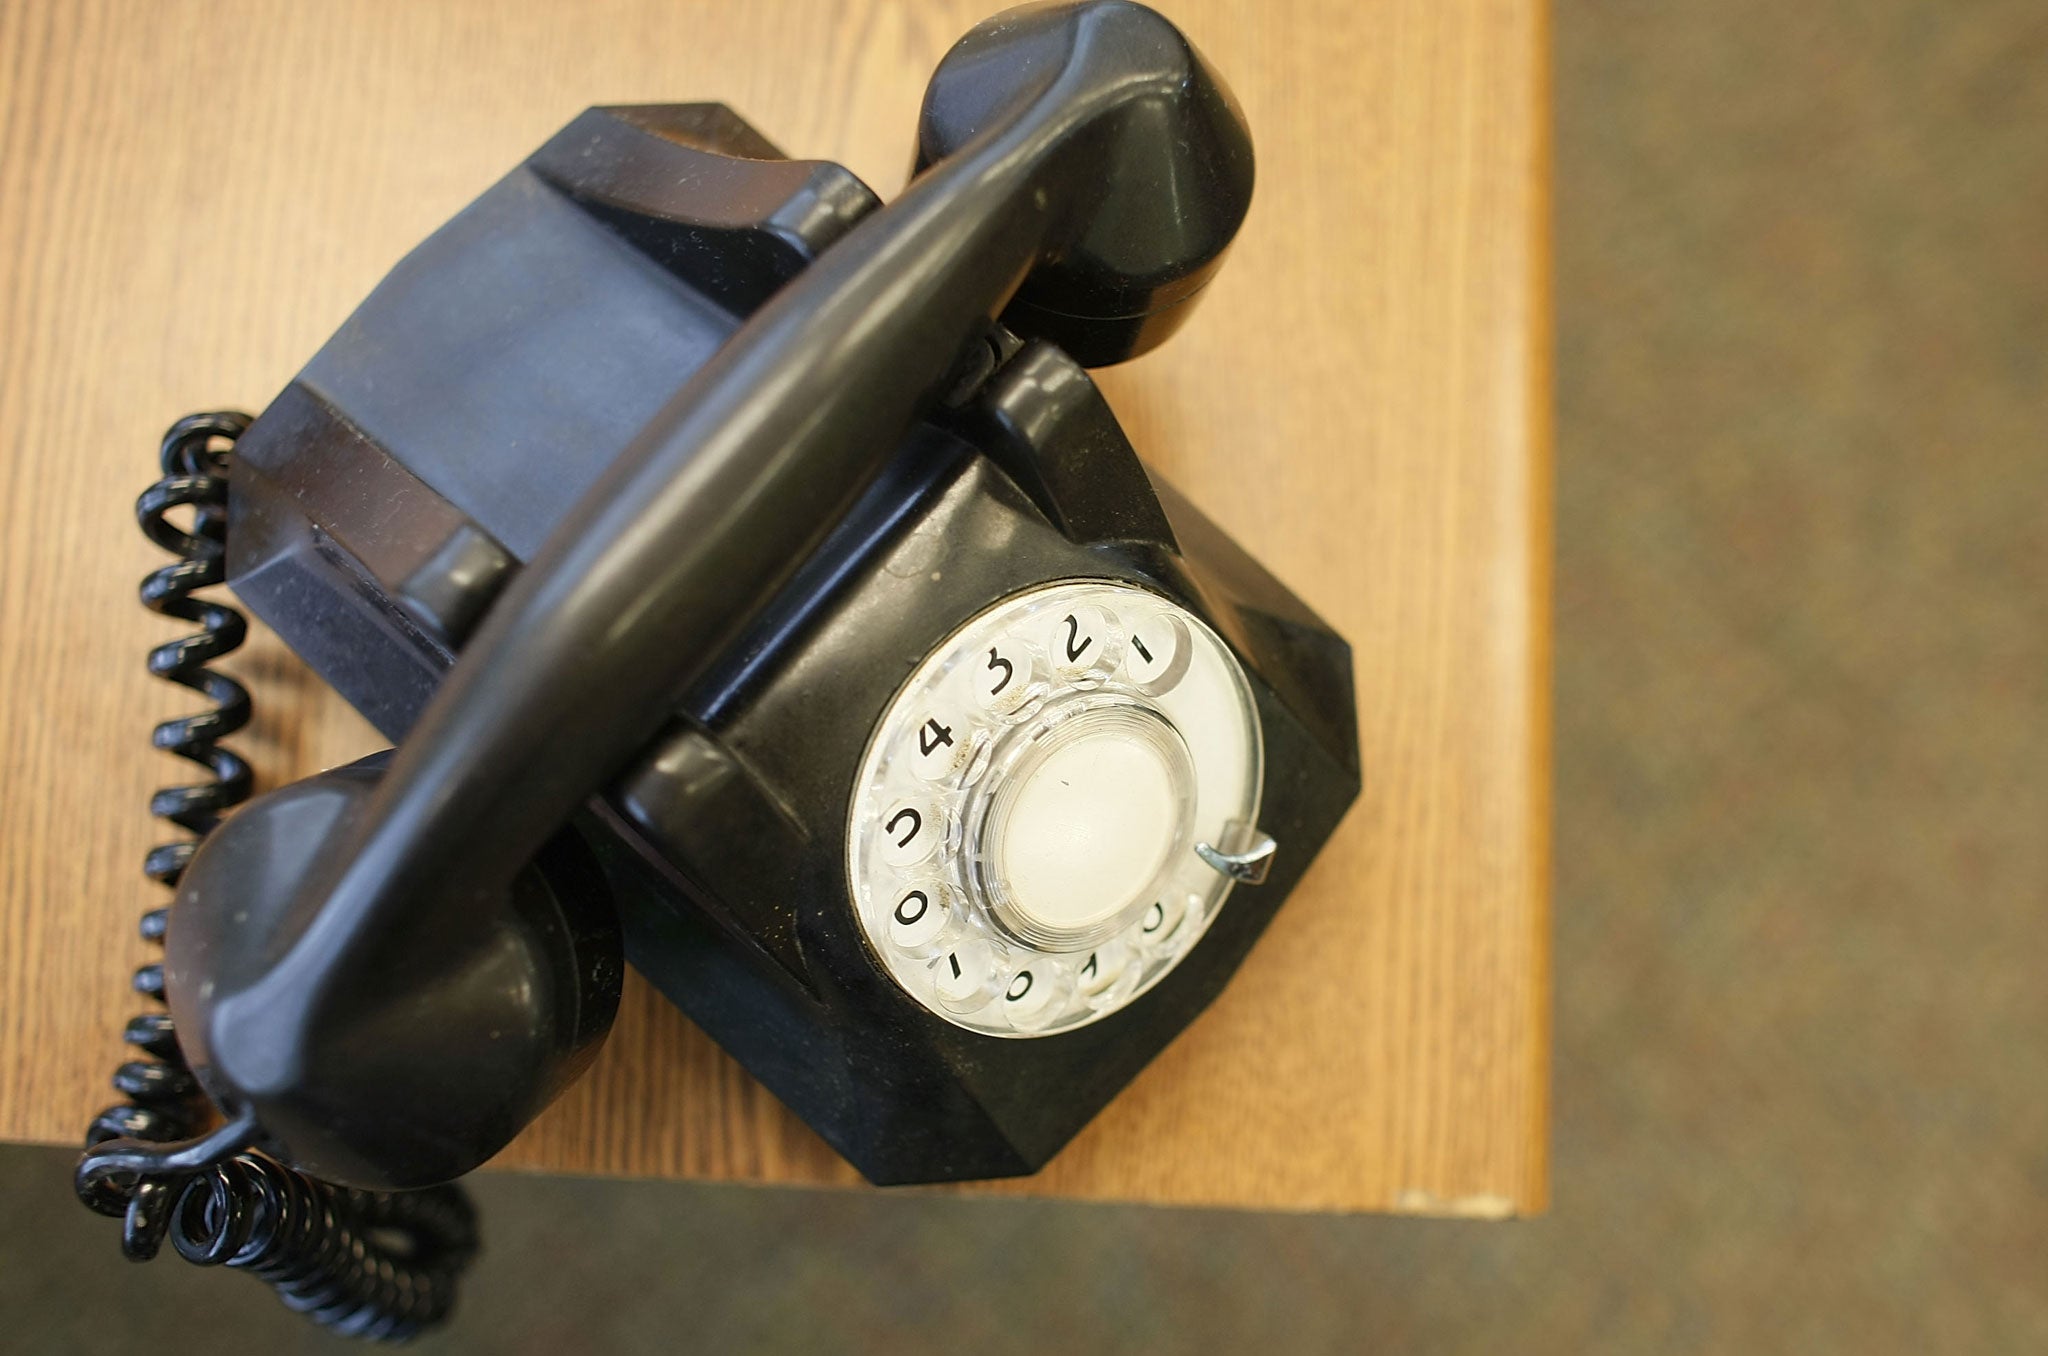 A rotary phone sits on desk of the newly opened Black Police Precinct and Courthouse Museum February 3, 2009 in Miami, Florida.